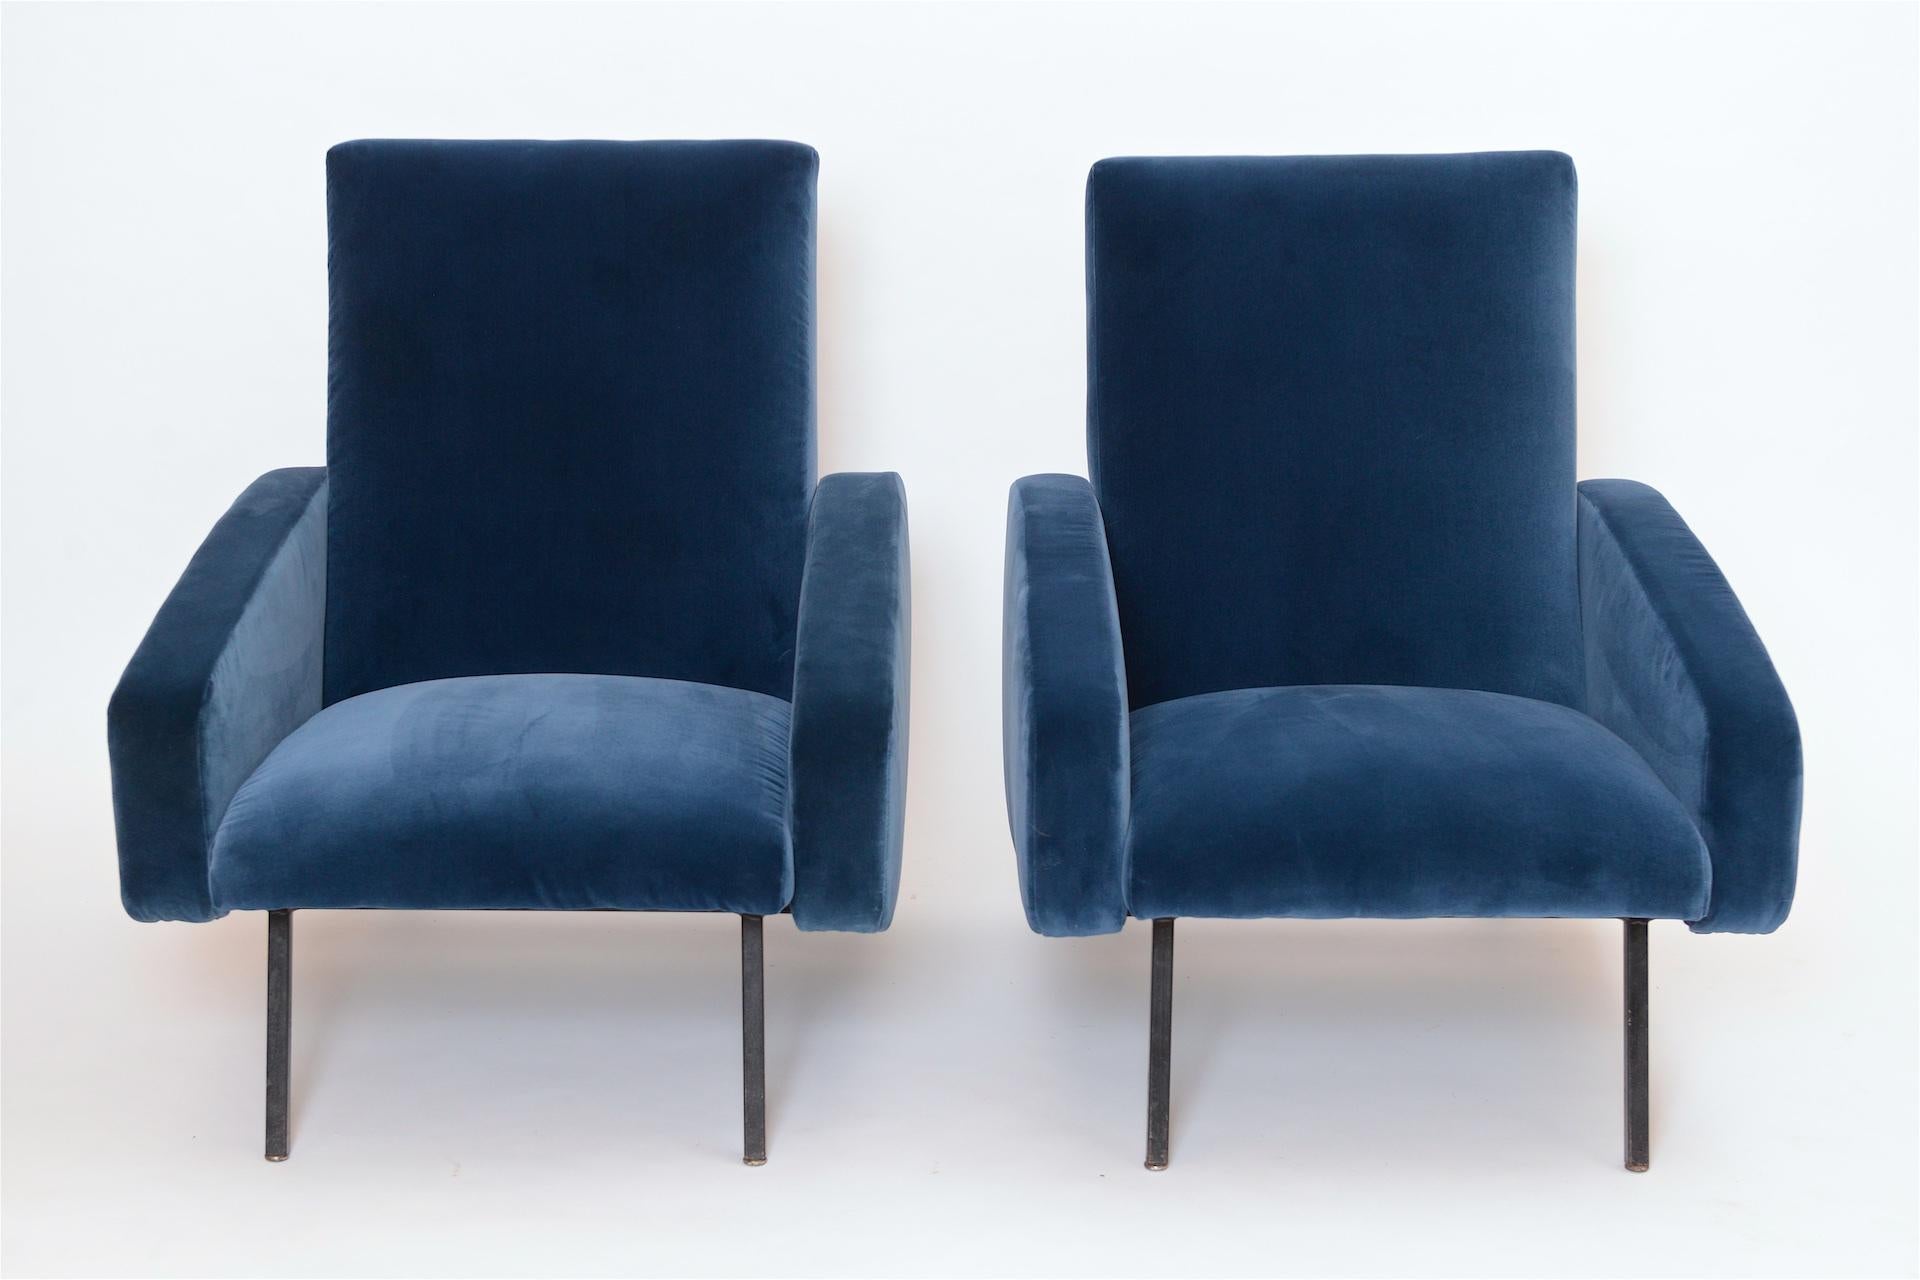 Mid-20th Century Pair of French Midcentury Armchairs, circa 1950